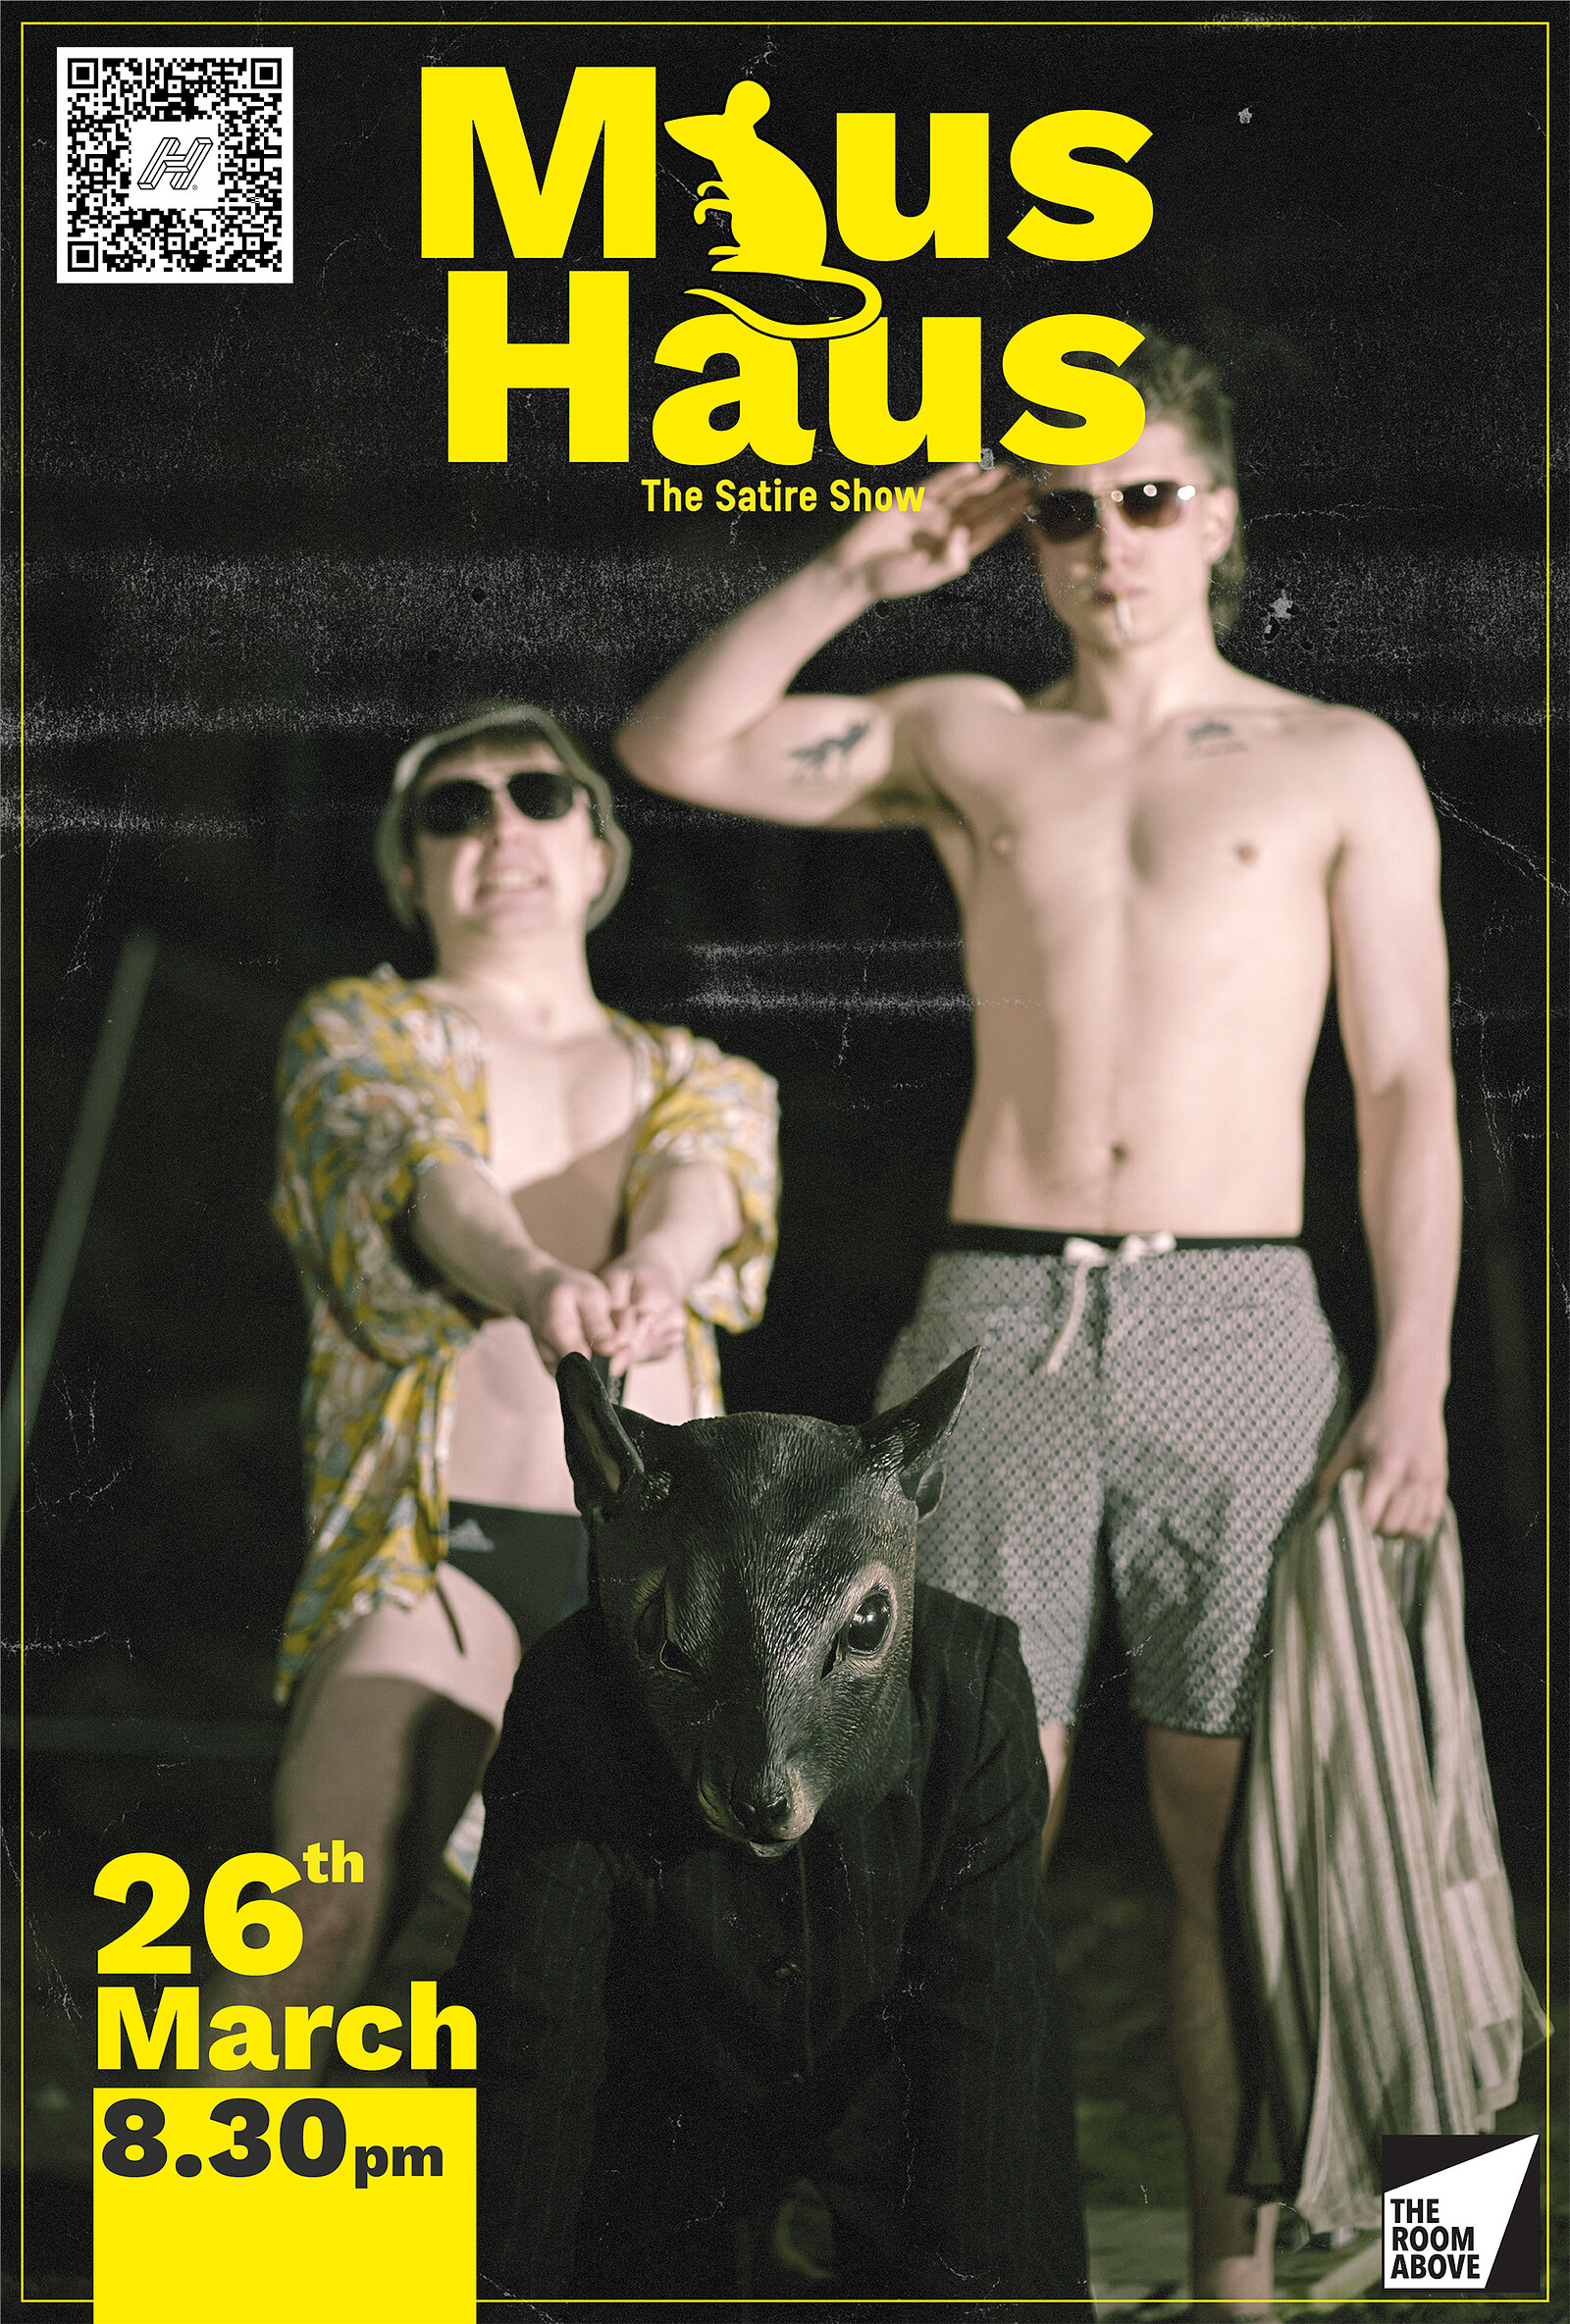 MAUS HAUS: The Satire Show at The Room Above